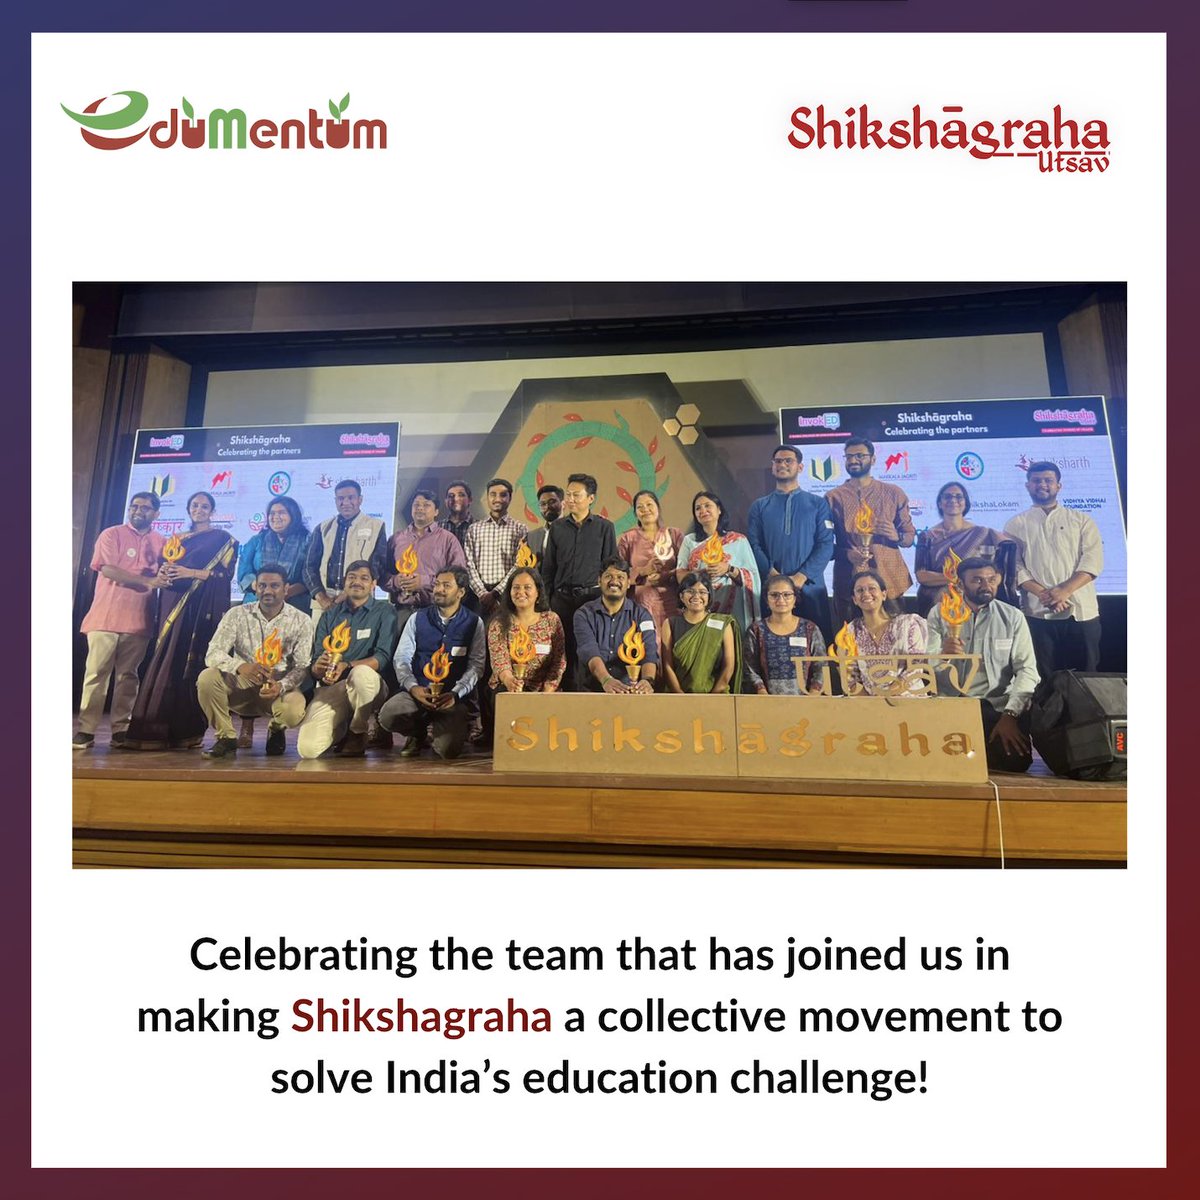 On Day 2 of #InvokED2024, at Shikshagraha Utsav, we celebrated all the organisations joining us in this movement towards #educationequity. We want to thank you all for being part of this journey, and we look forward to the road ahead. 
@edumentum @shikshalokam #missiontomovement